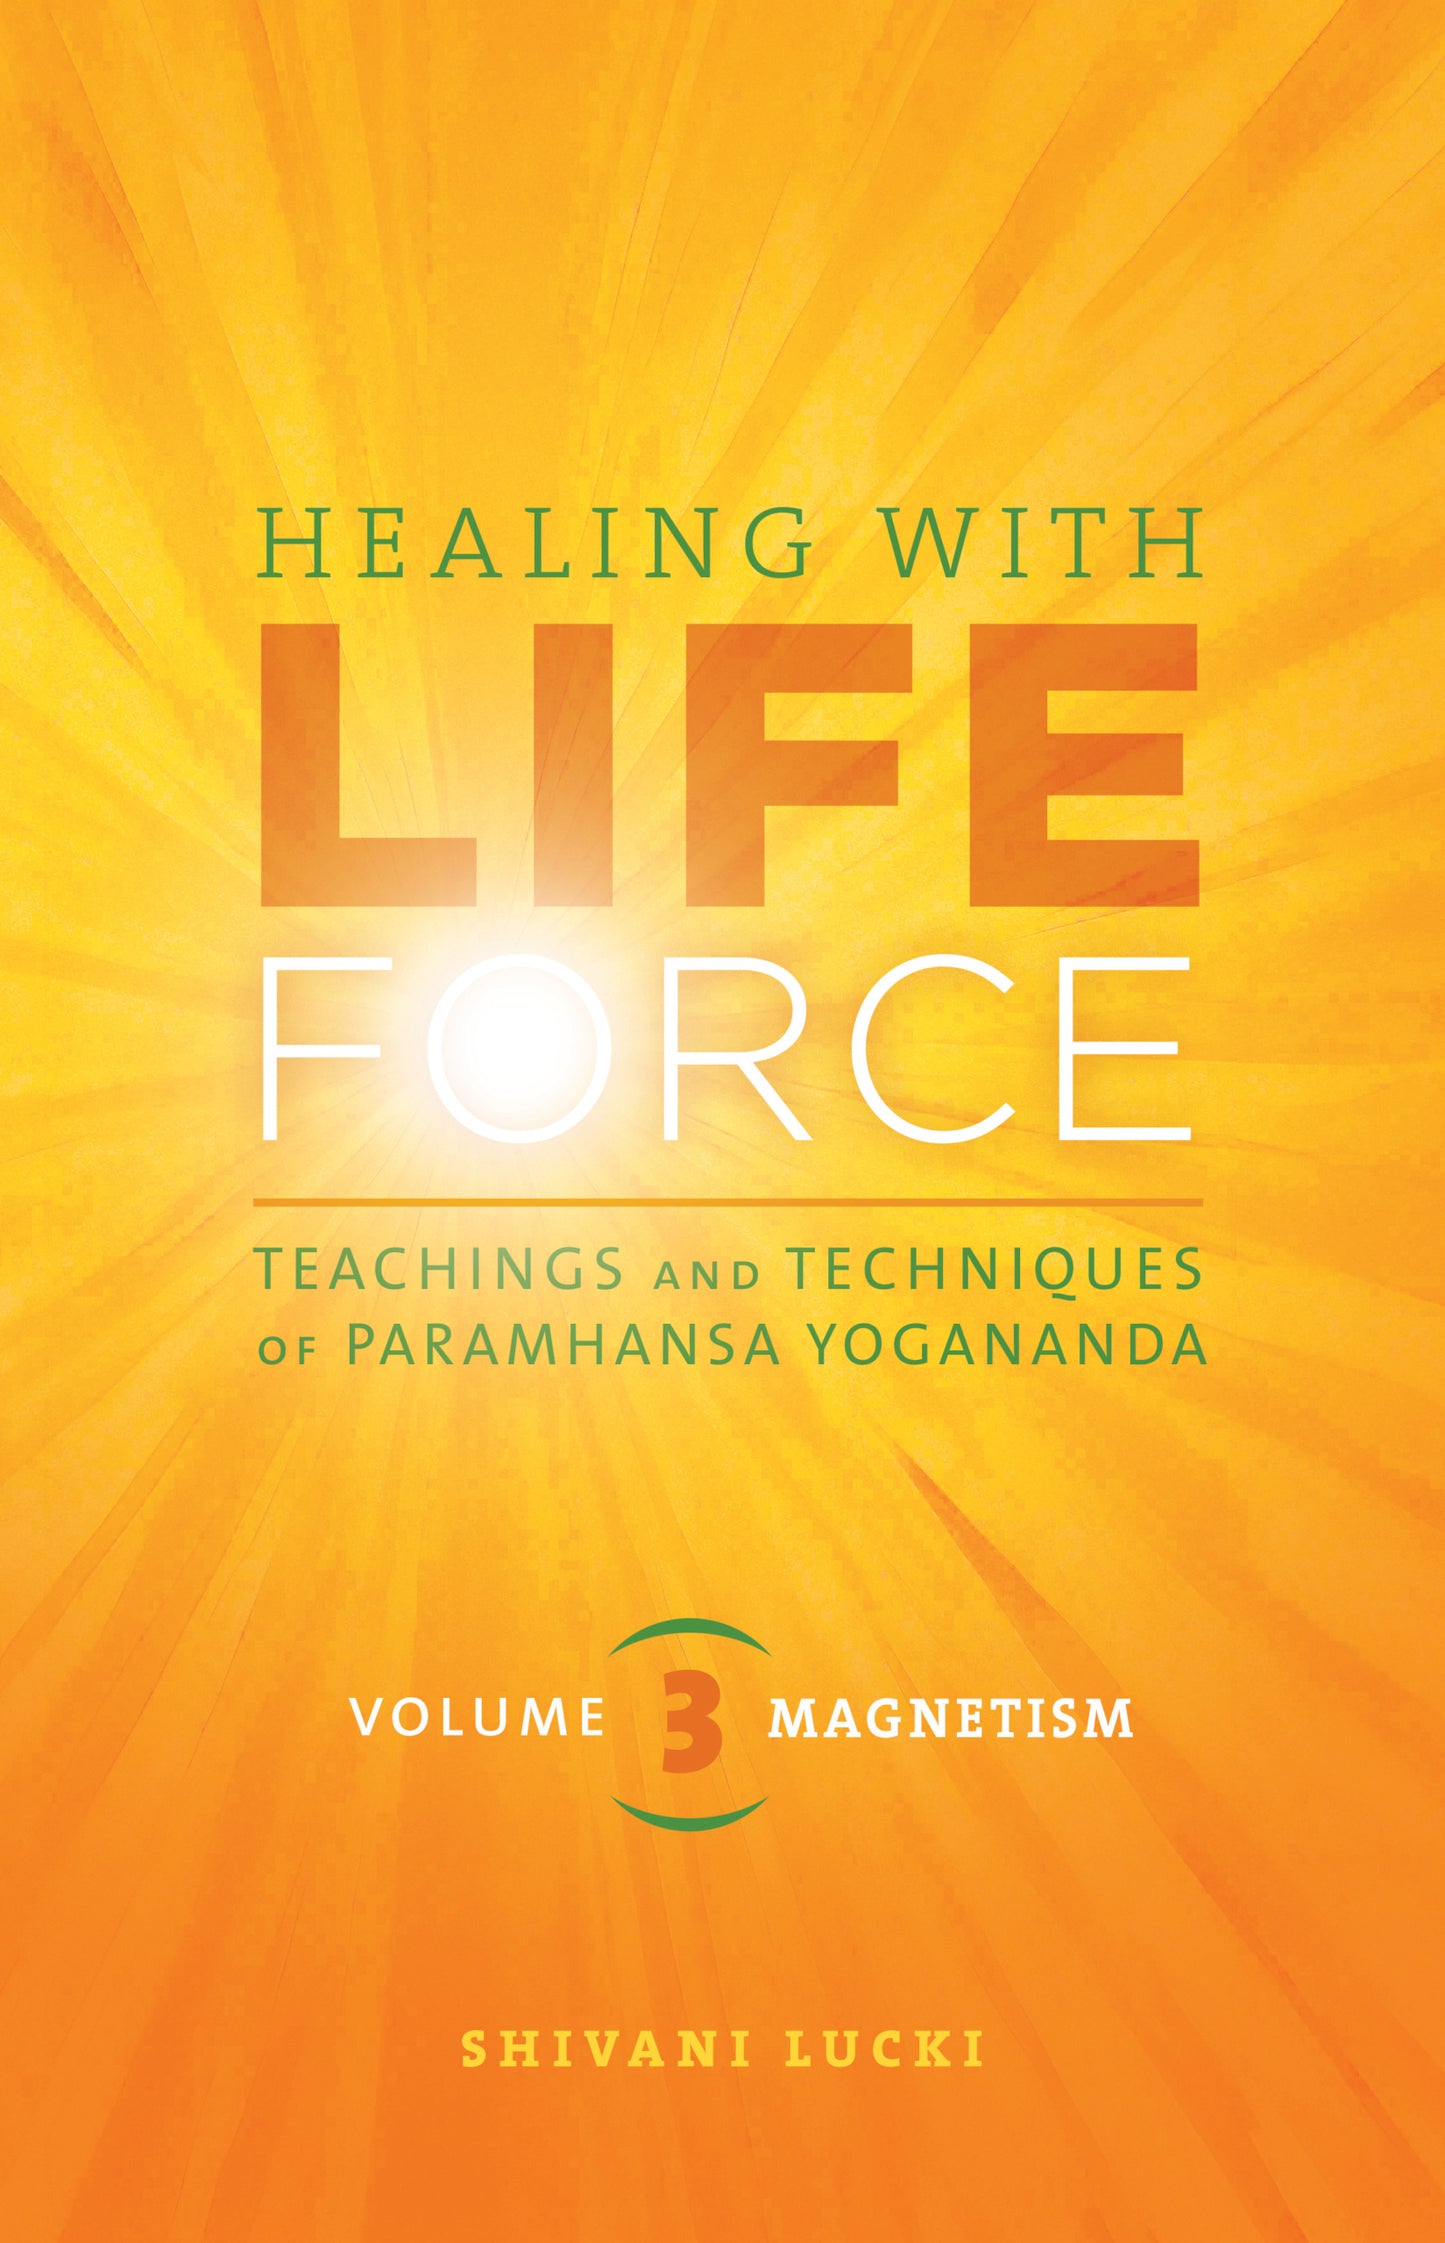 Healing with Life Force by Nayaswami Shivani - Vol 3 - Magnetism: Teachings and Techniques of Paramhansa Yogananda